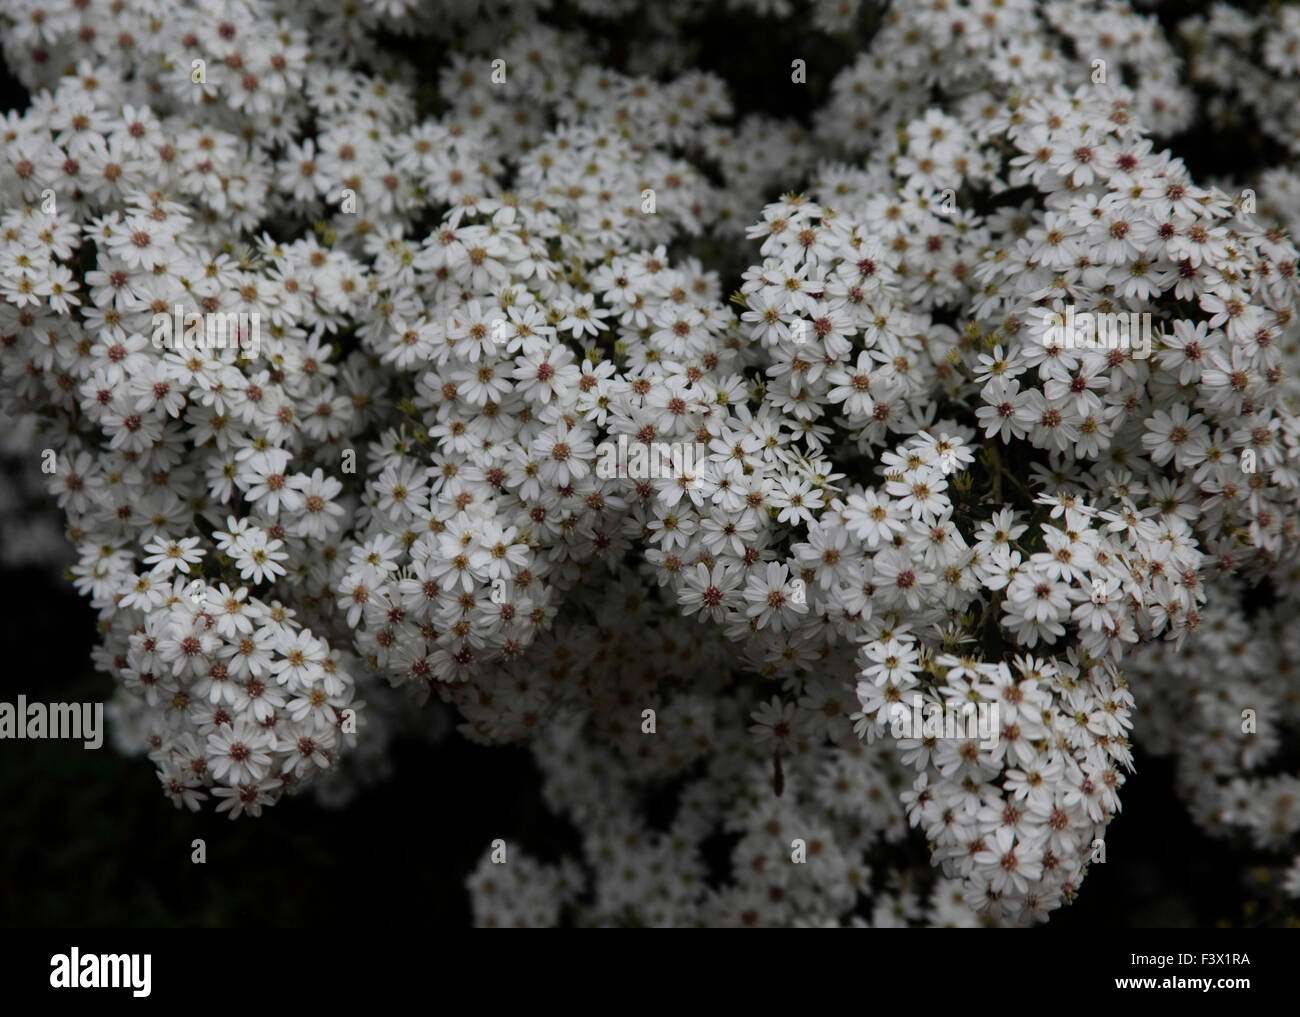 Olearia phlogopappa close up of flowers Stock Photo